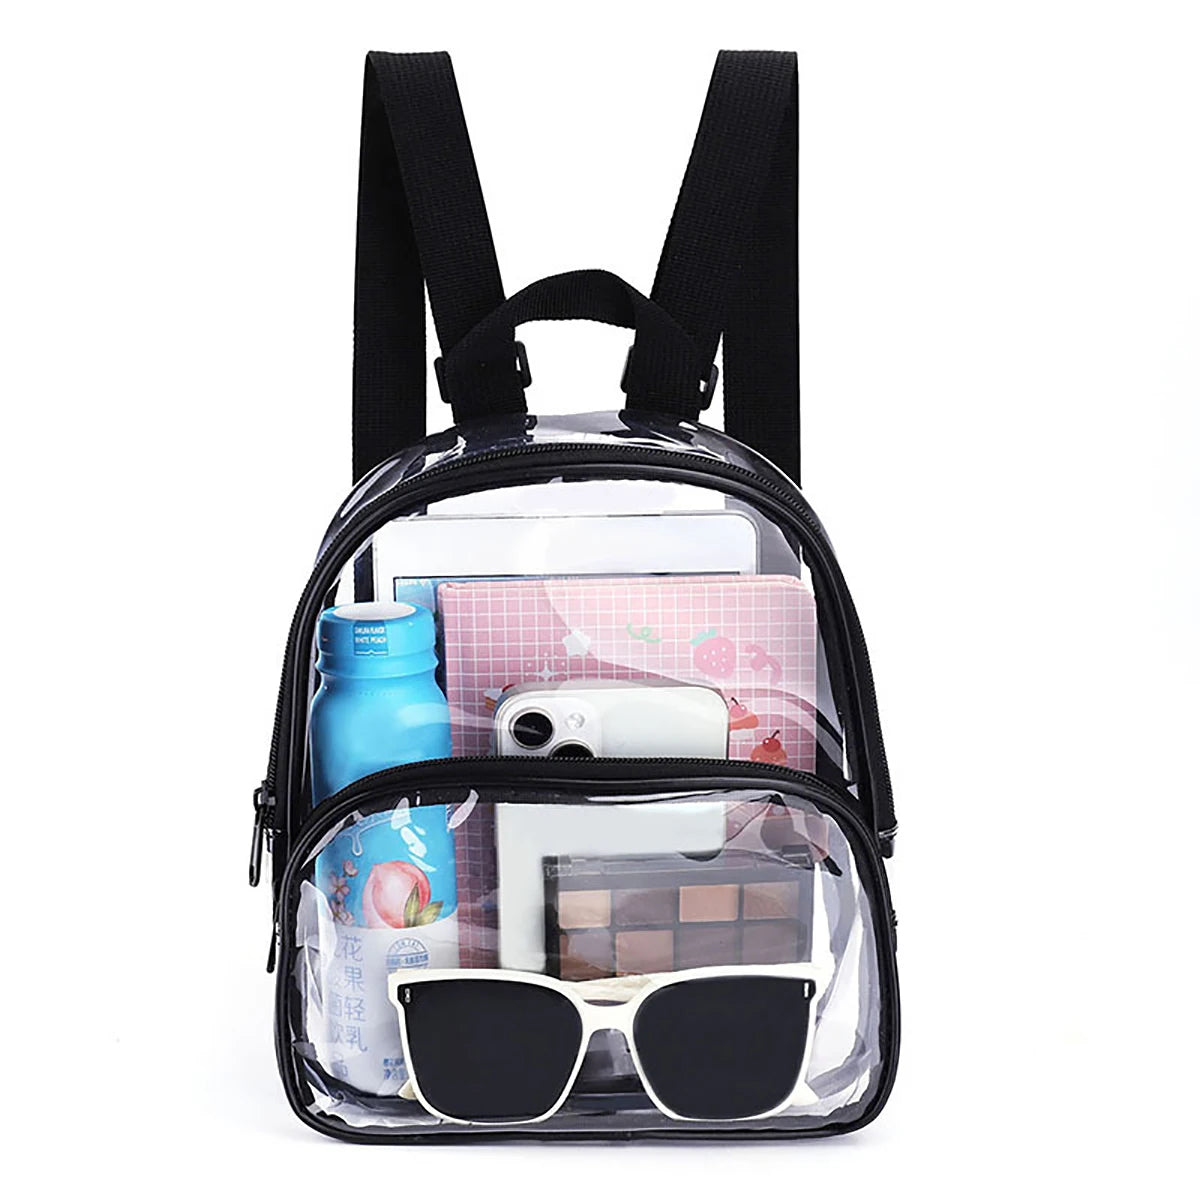 See through backpack for stadium